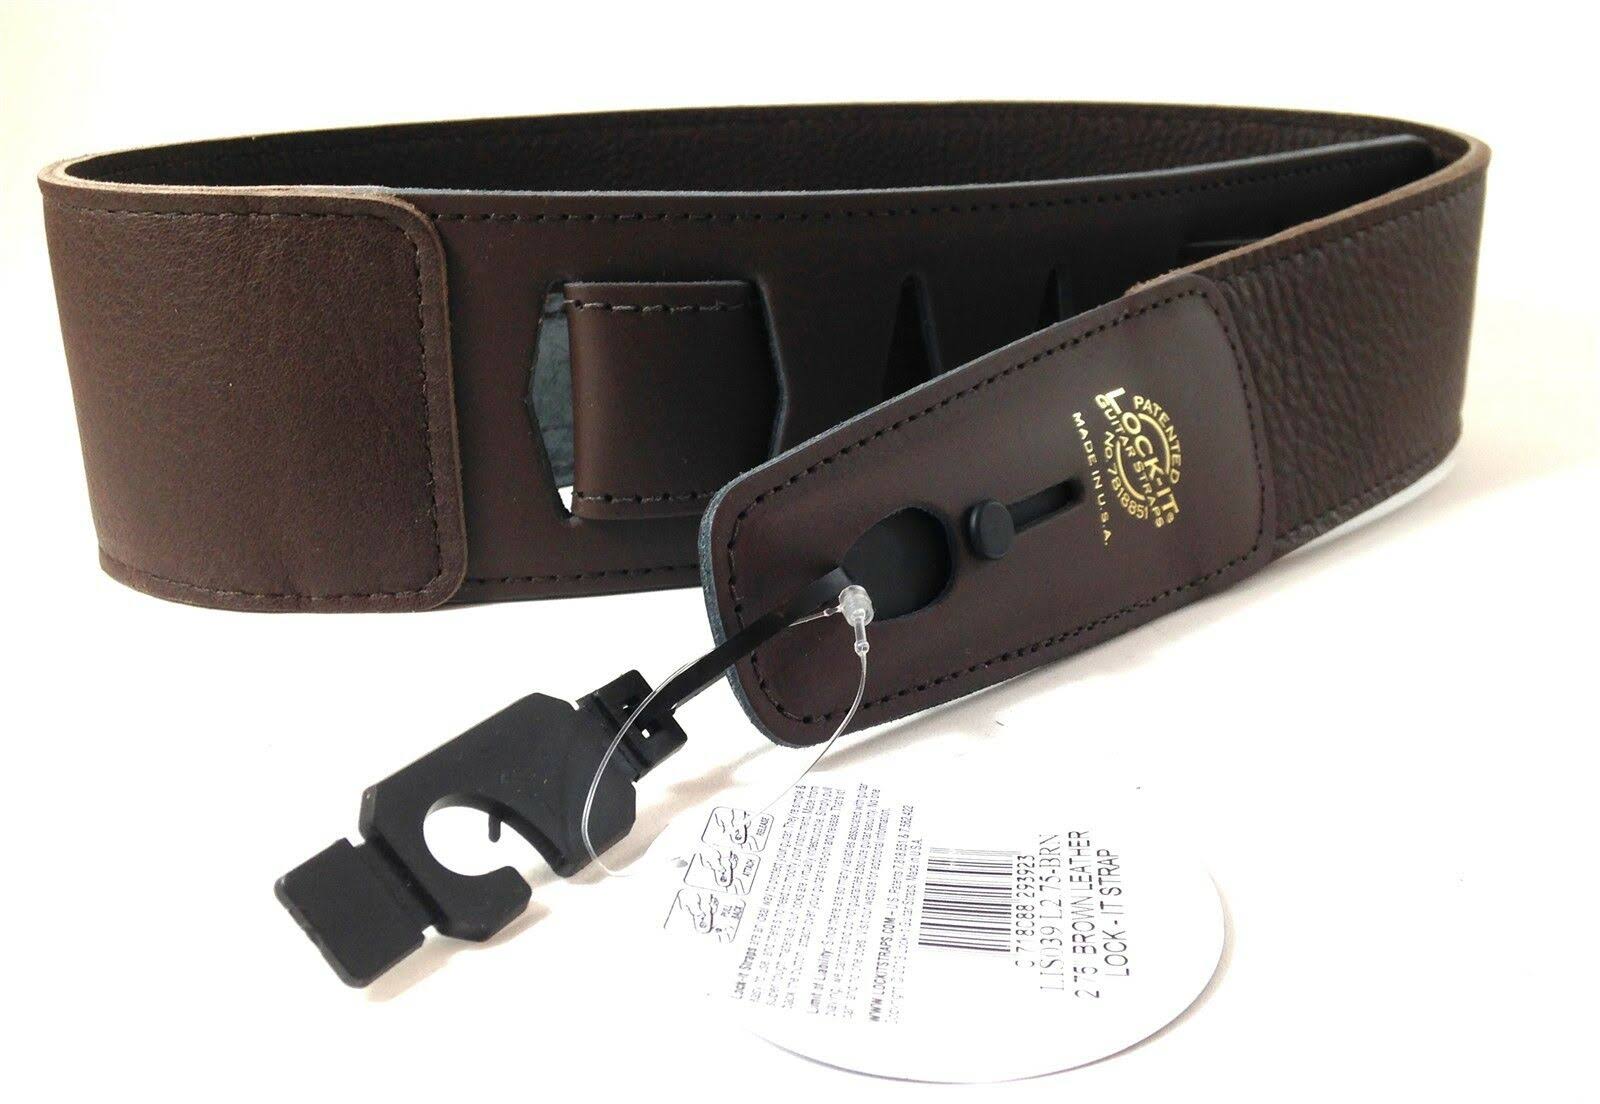 Lock-It Soft Leather Patented Locking Technology Guitar Strap - Brown, 2-3/4in